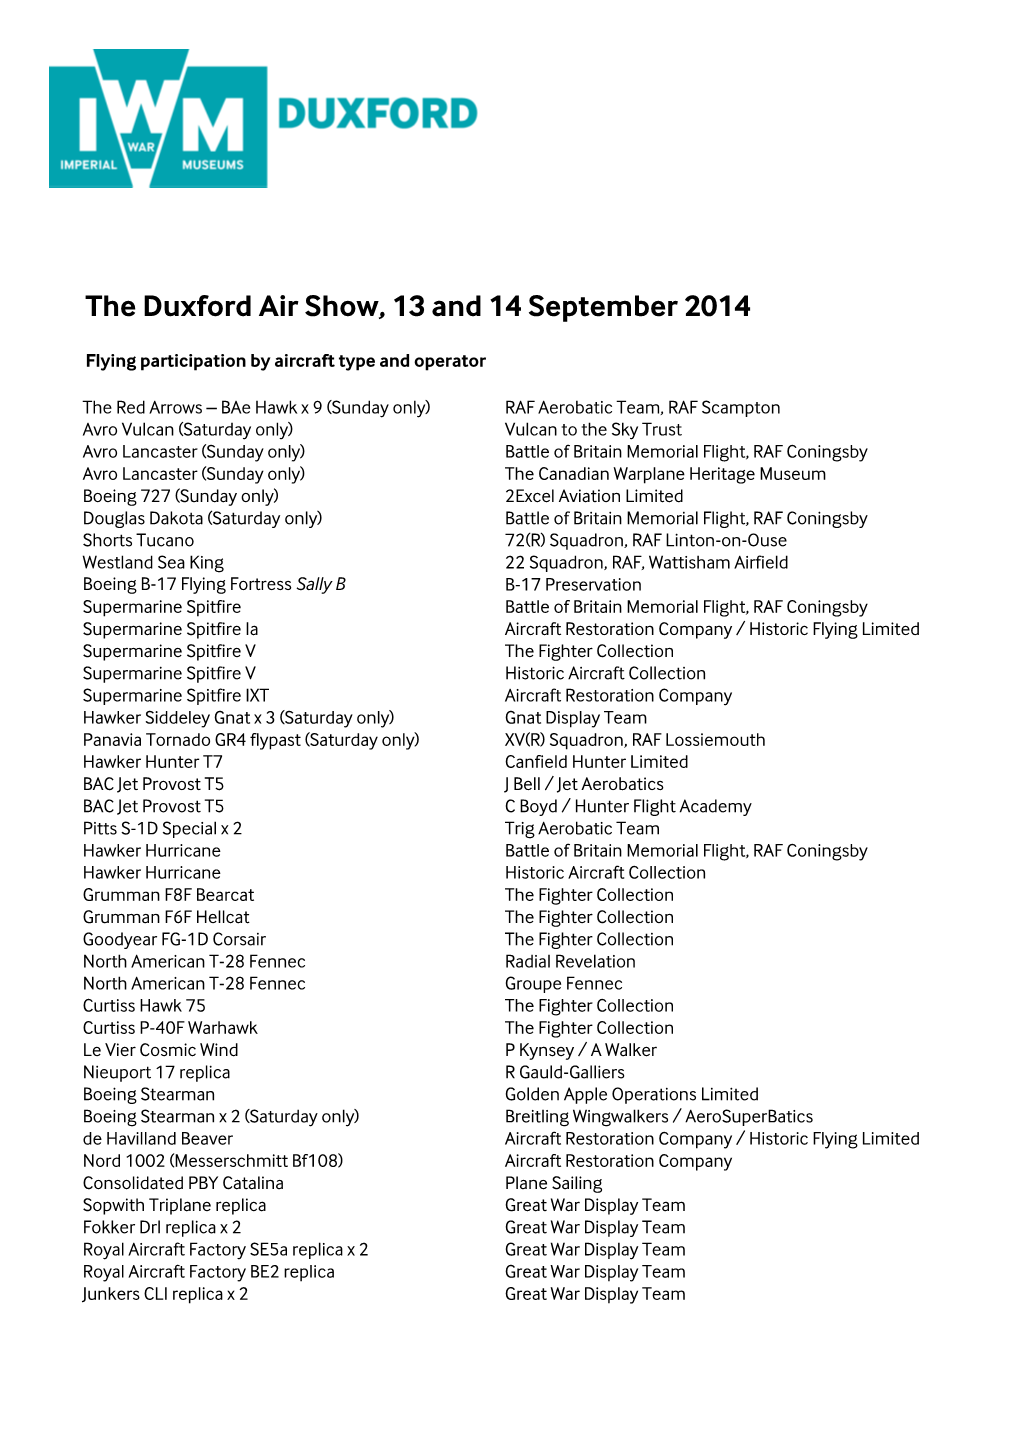 The Duxford Air Show, 13 and 14 September 2014